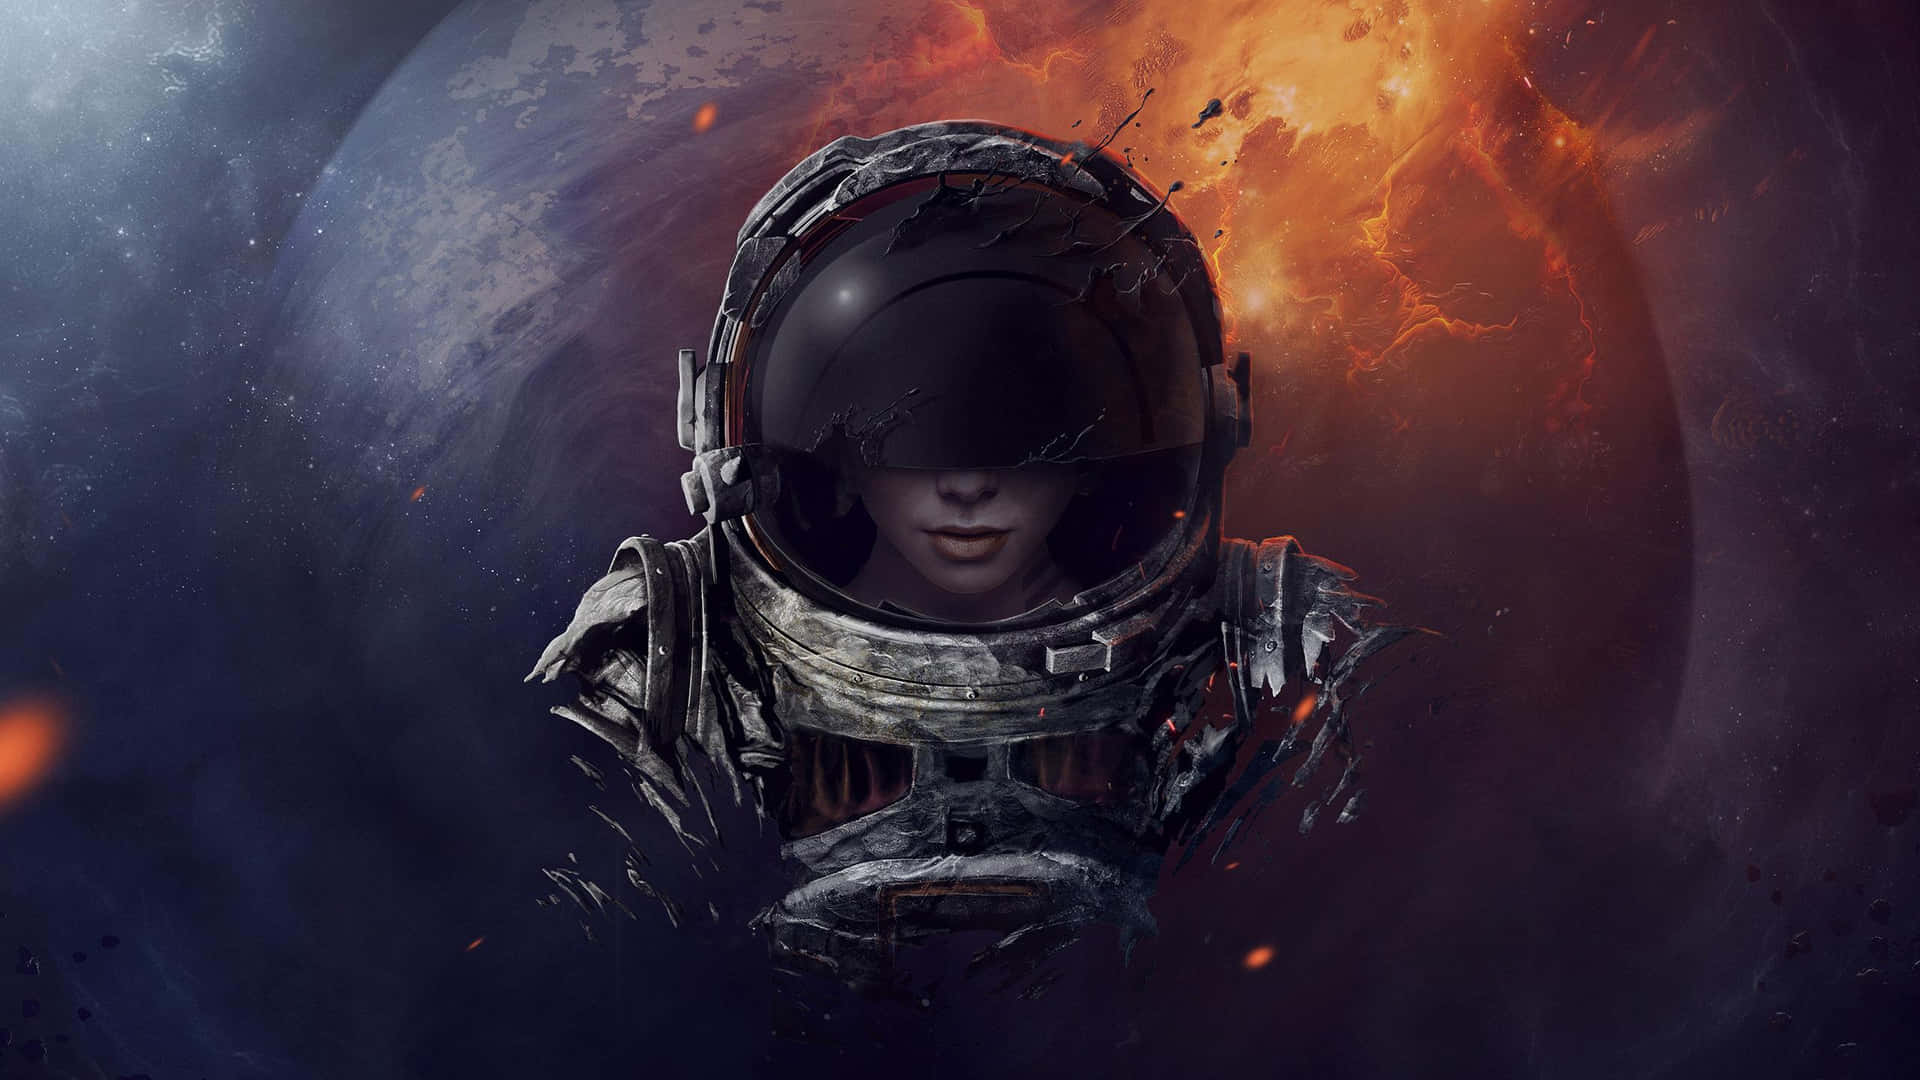 A close-up of an astronaut in outer space Wallpaper